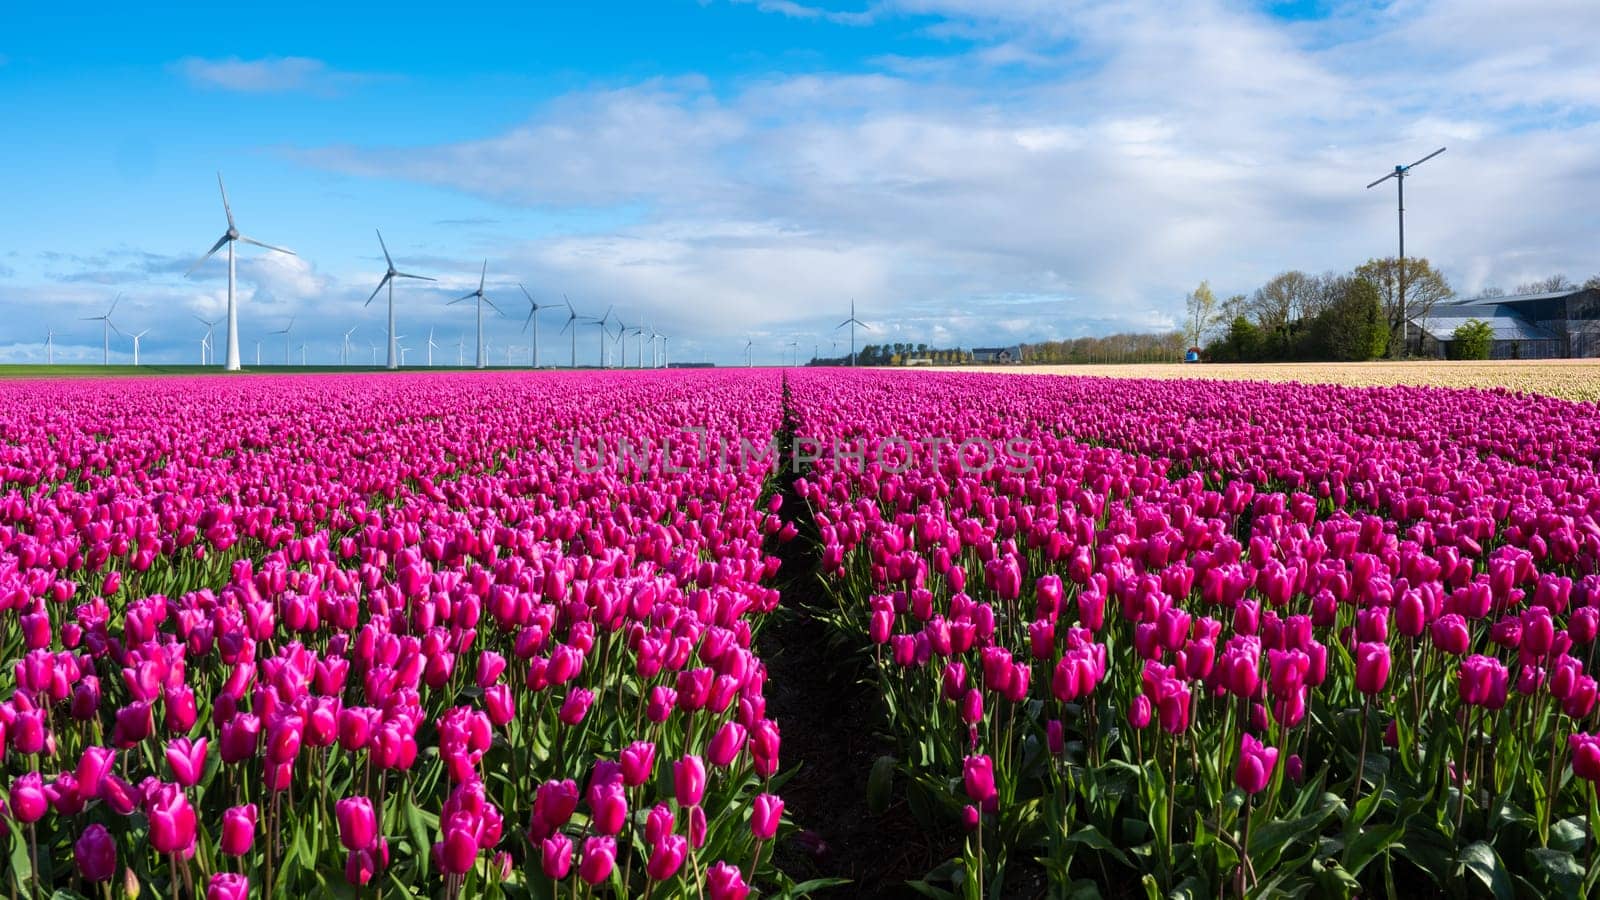 A vibrant field of pink tulips sways gracefully in the wind, framed by majestic windmills scattered across the picturesque Dutch countryside by fokkebok